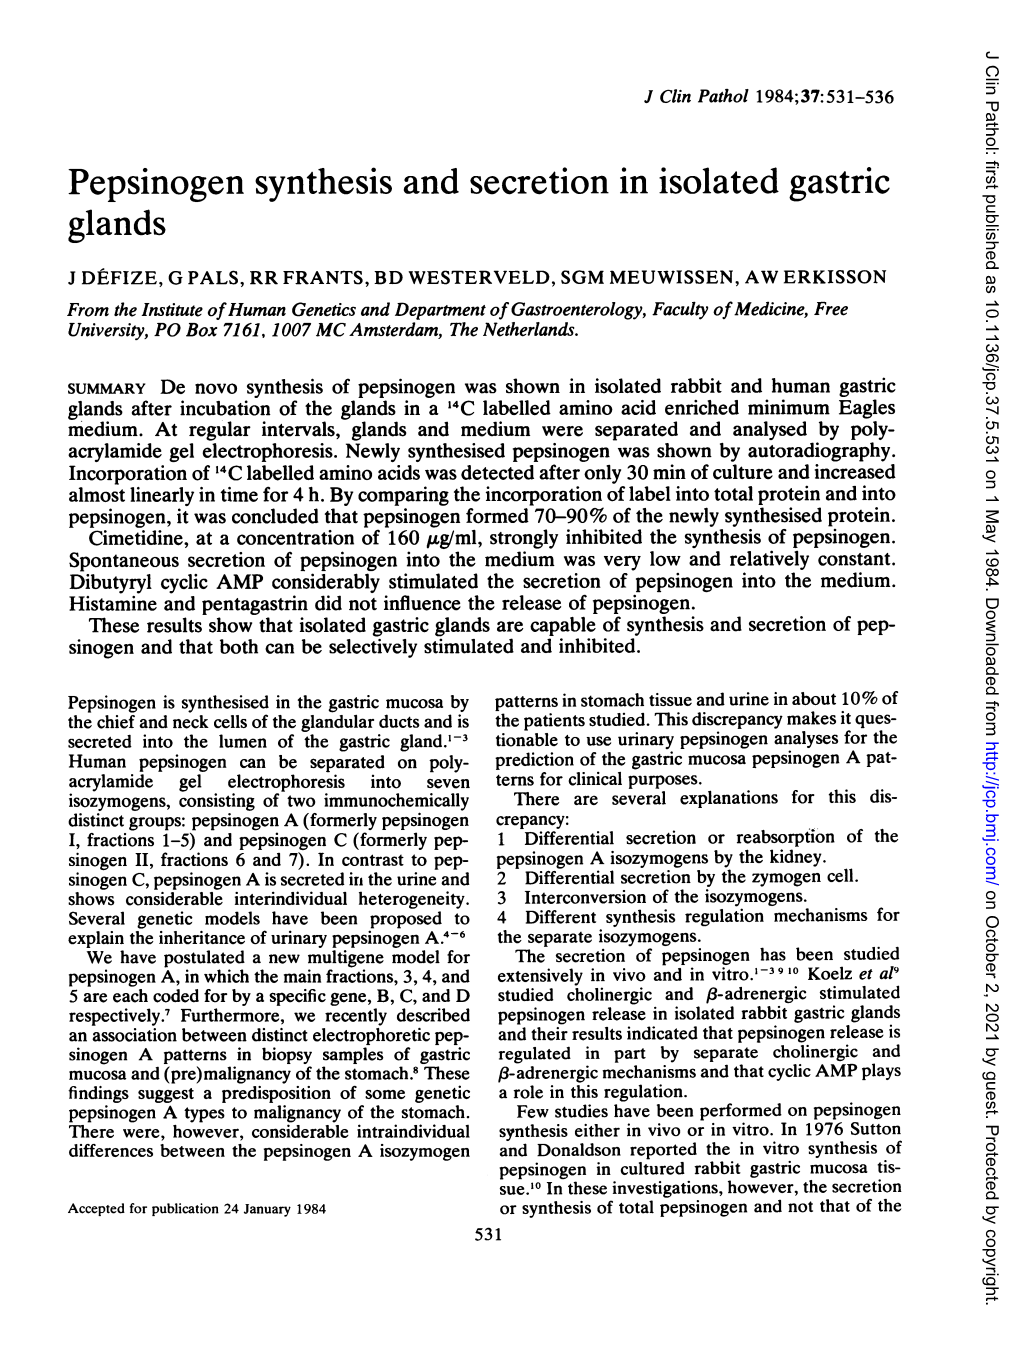 Pepsinogen Synthesis and Secretion in Isolated Gastric Glands